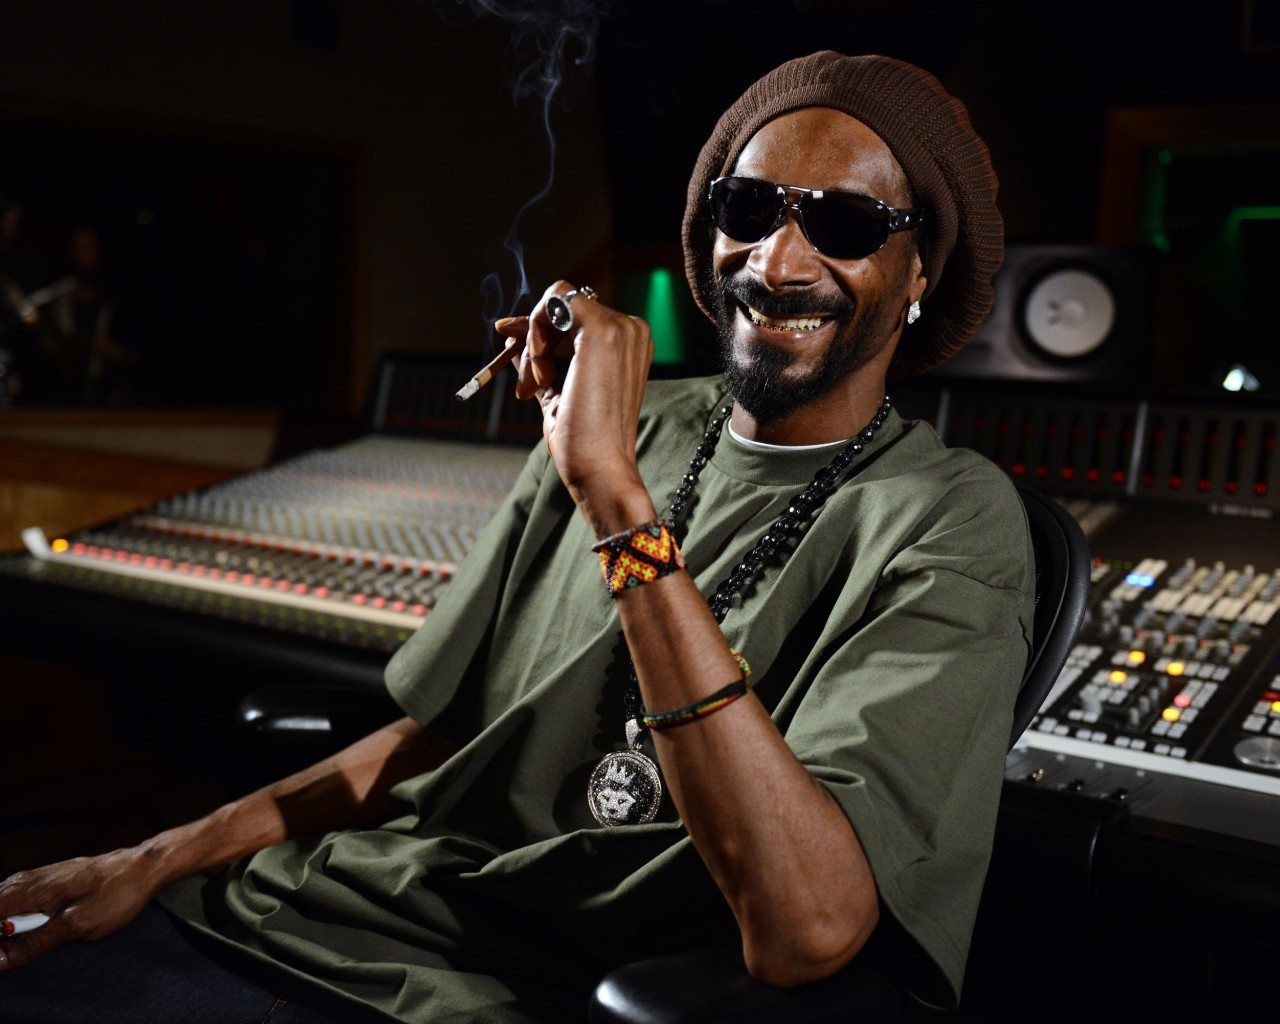 Snoop Dogg Smile for 1280 x 1024 resolution